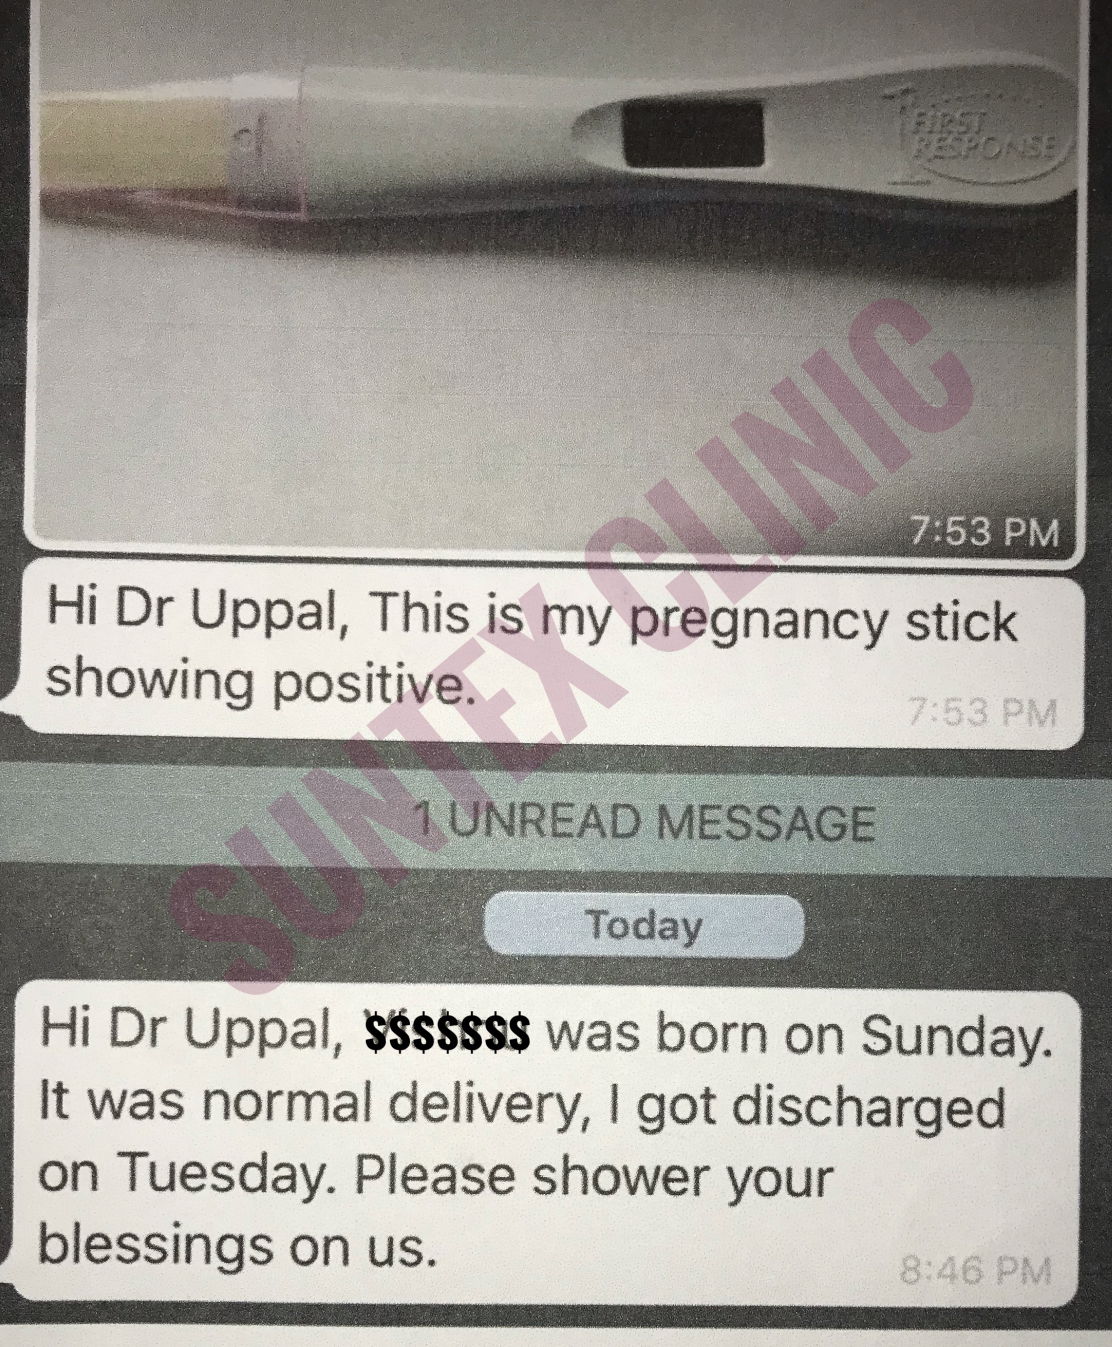 The pregnancy and delivery intimation .